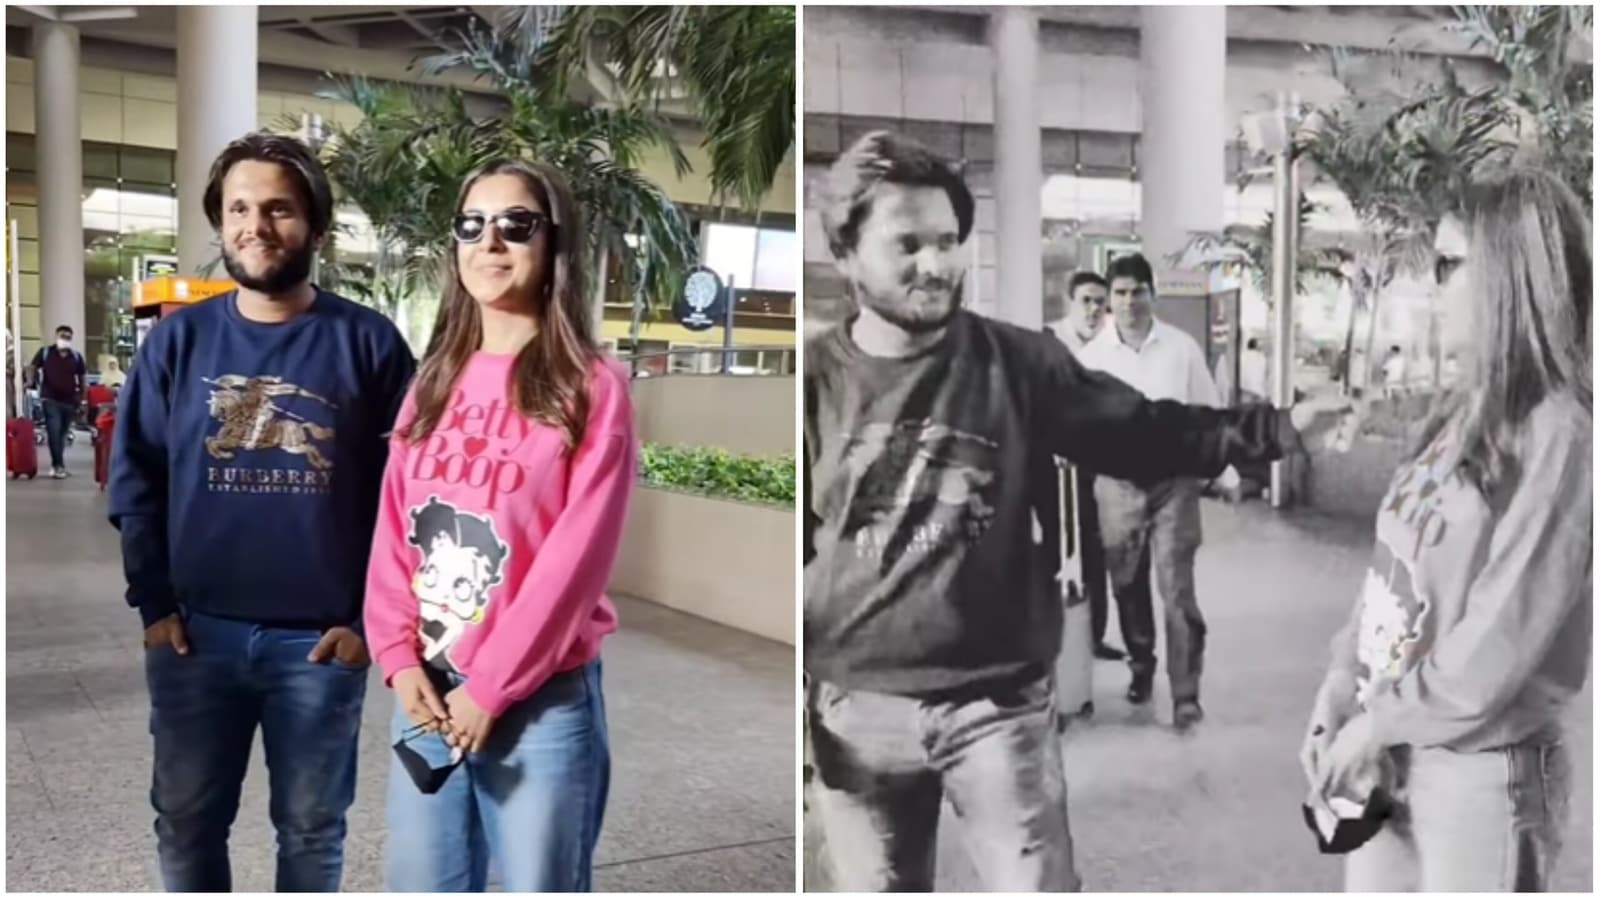 shehnaaz-gill-reacts-after-eager-fan-tries-to-grab-hold-of-her-for-picture-at-airport-tujhe-kya-laga-dost-hai